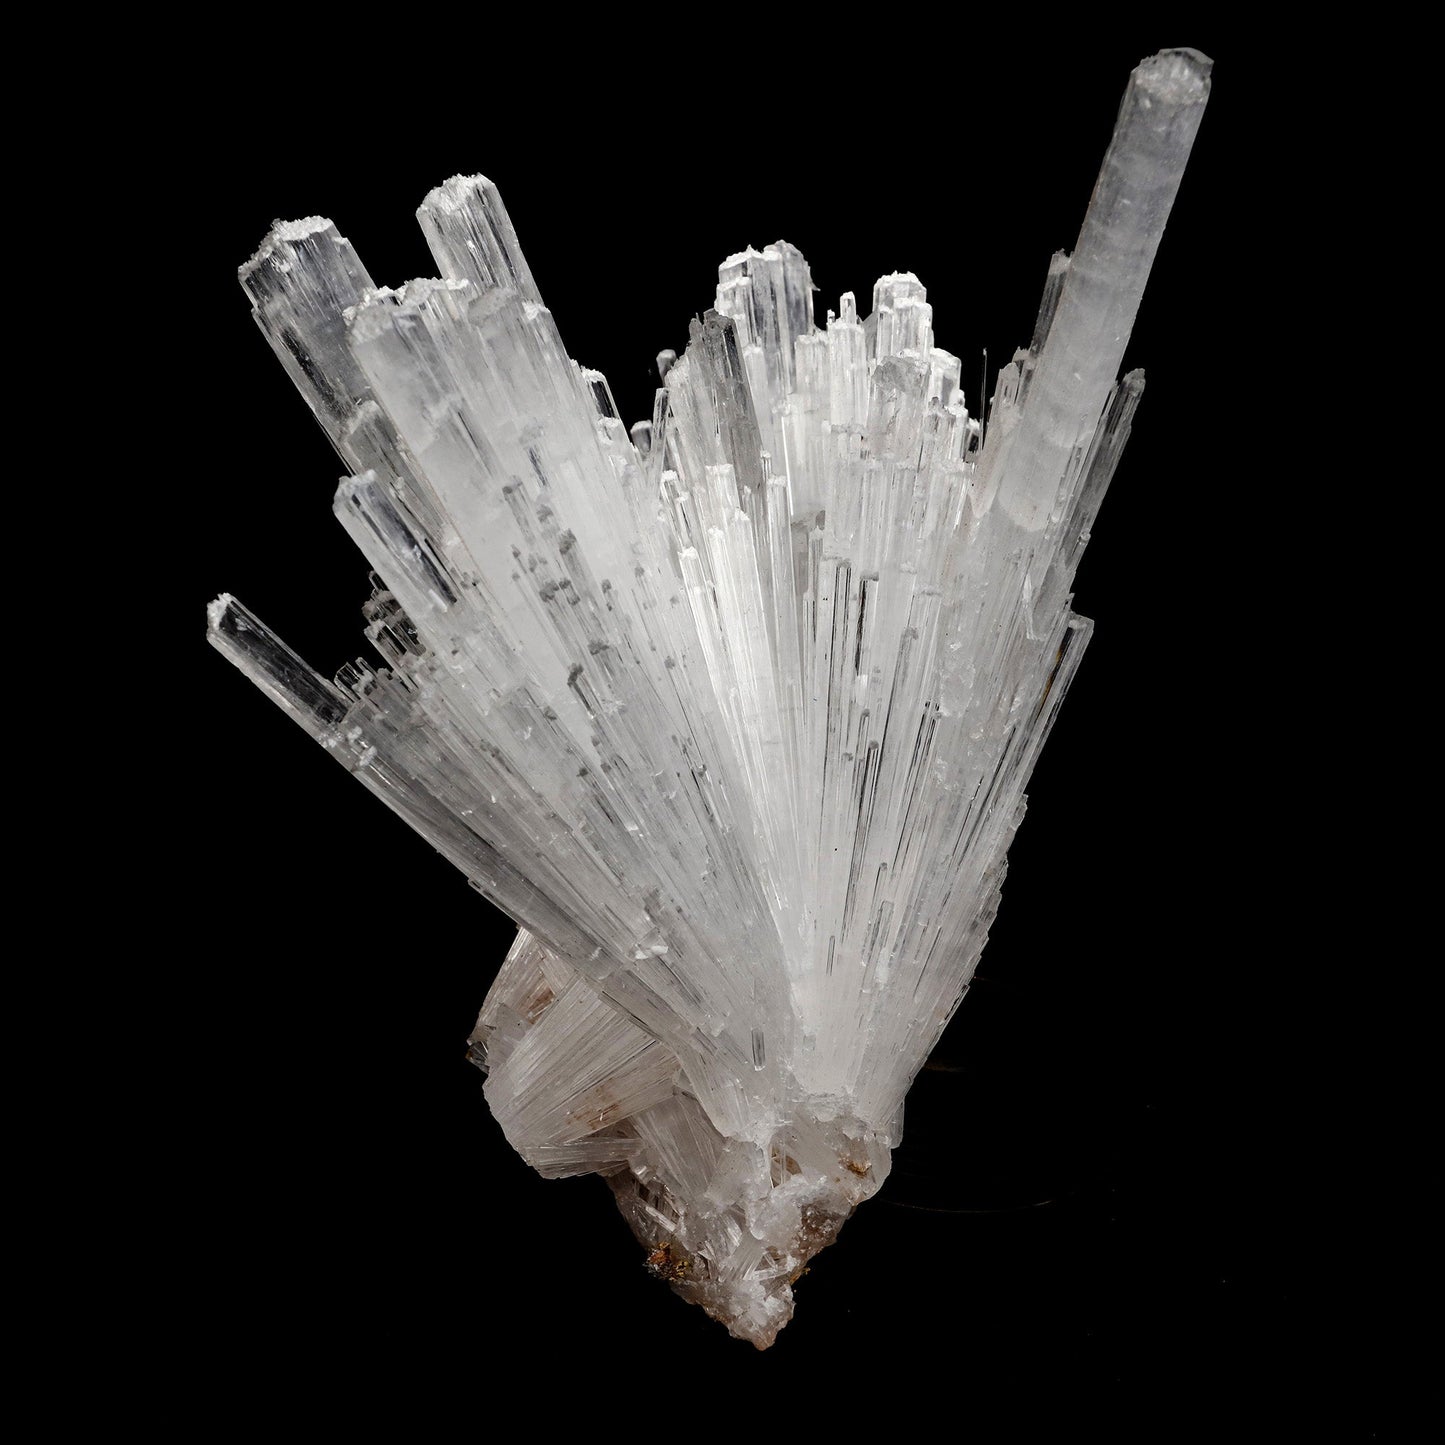 Scolecite Sprays Natural Mineral Specimen # B 5223  https://www.superbminerals.us/products/scolecite-sprays-natural-mineral-specimen-b-5223  Features: A large, tapered spray of elongated colorless Scolecite crystals. There is a small remnant of matrix attached with a small Stilbite crystal. The Scolecite crystals are glassy and highly translucent with transparent terminations. A beautiful specimen in excellent condition. Primary Mineral(s): Scolecite